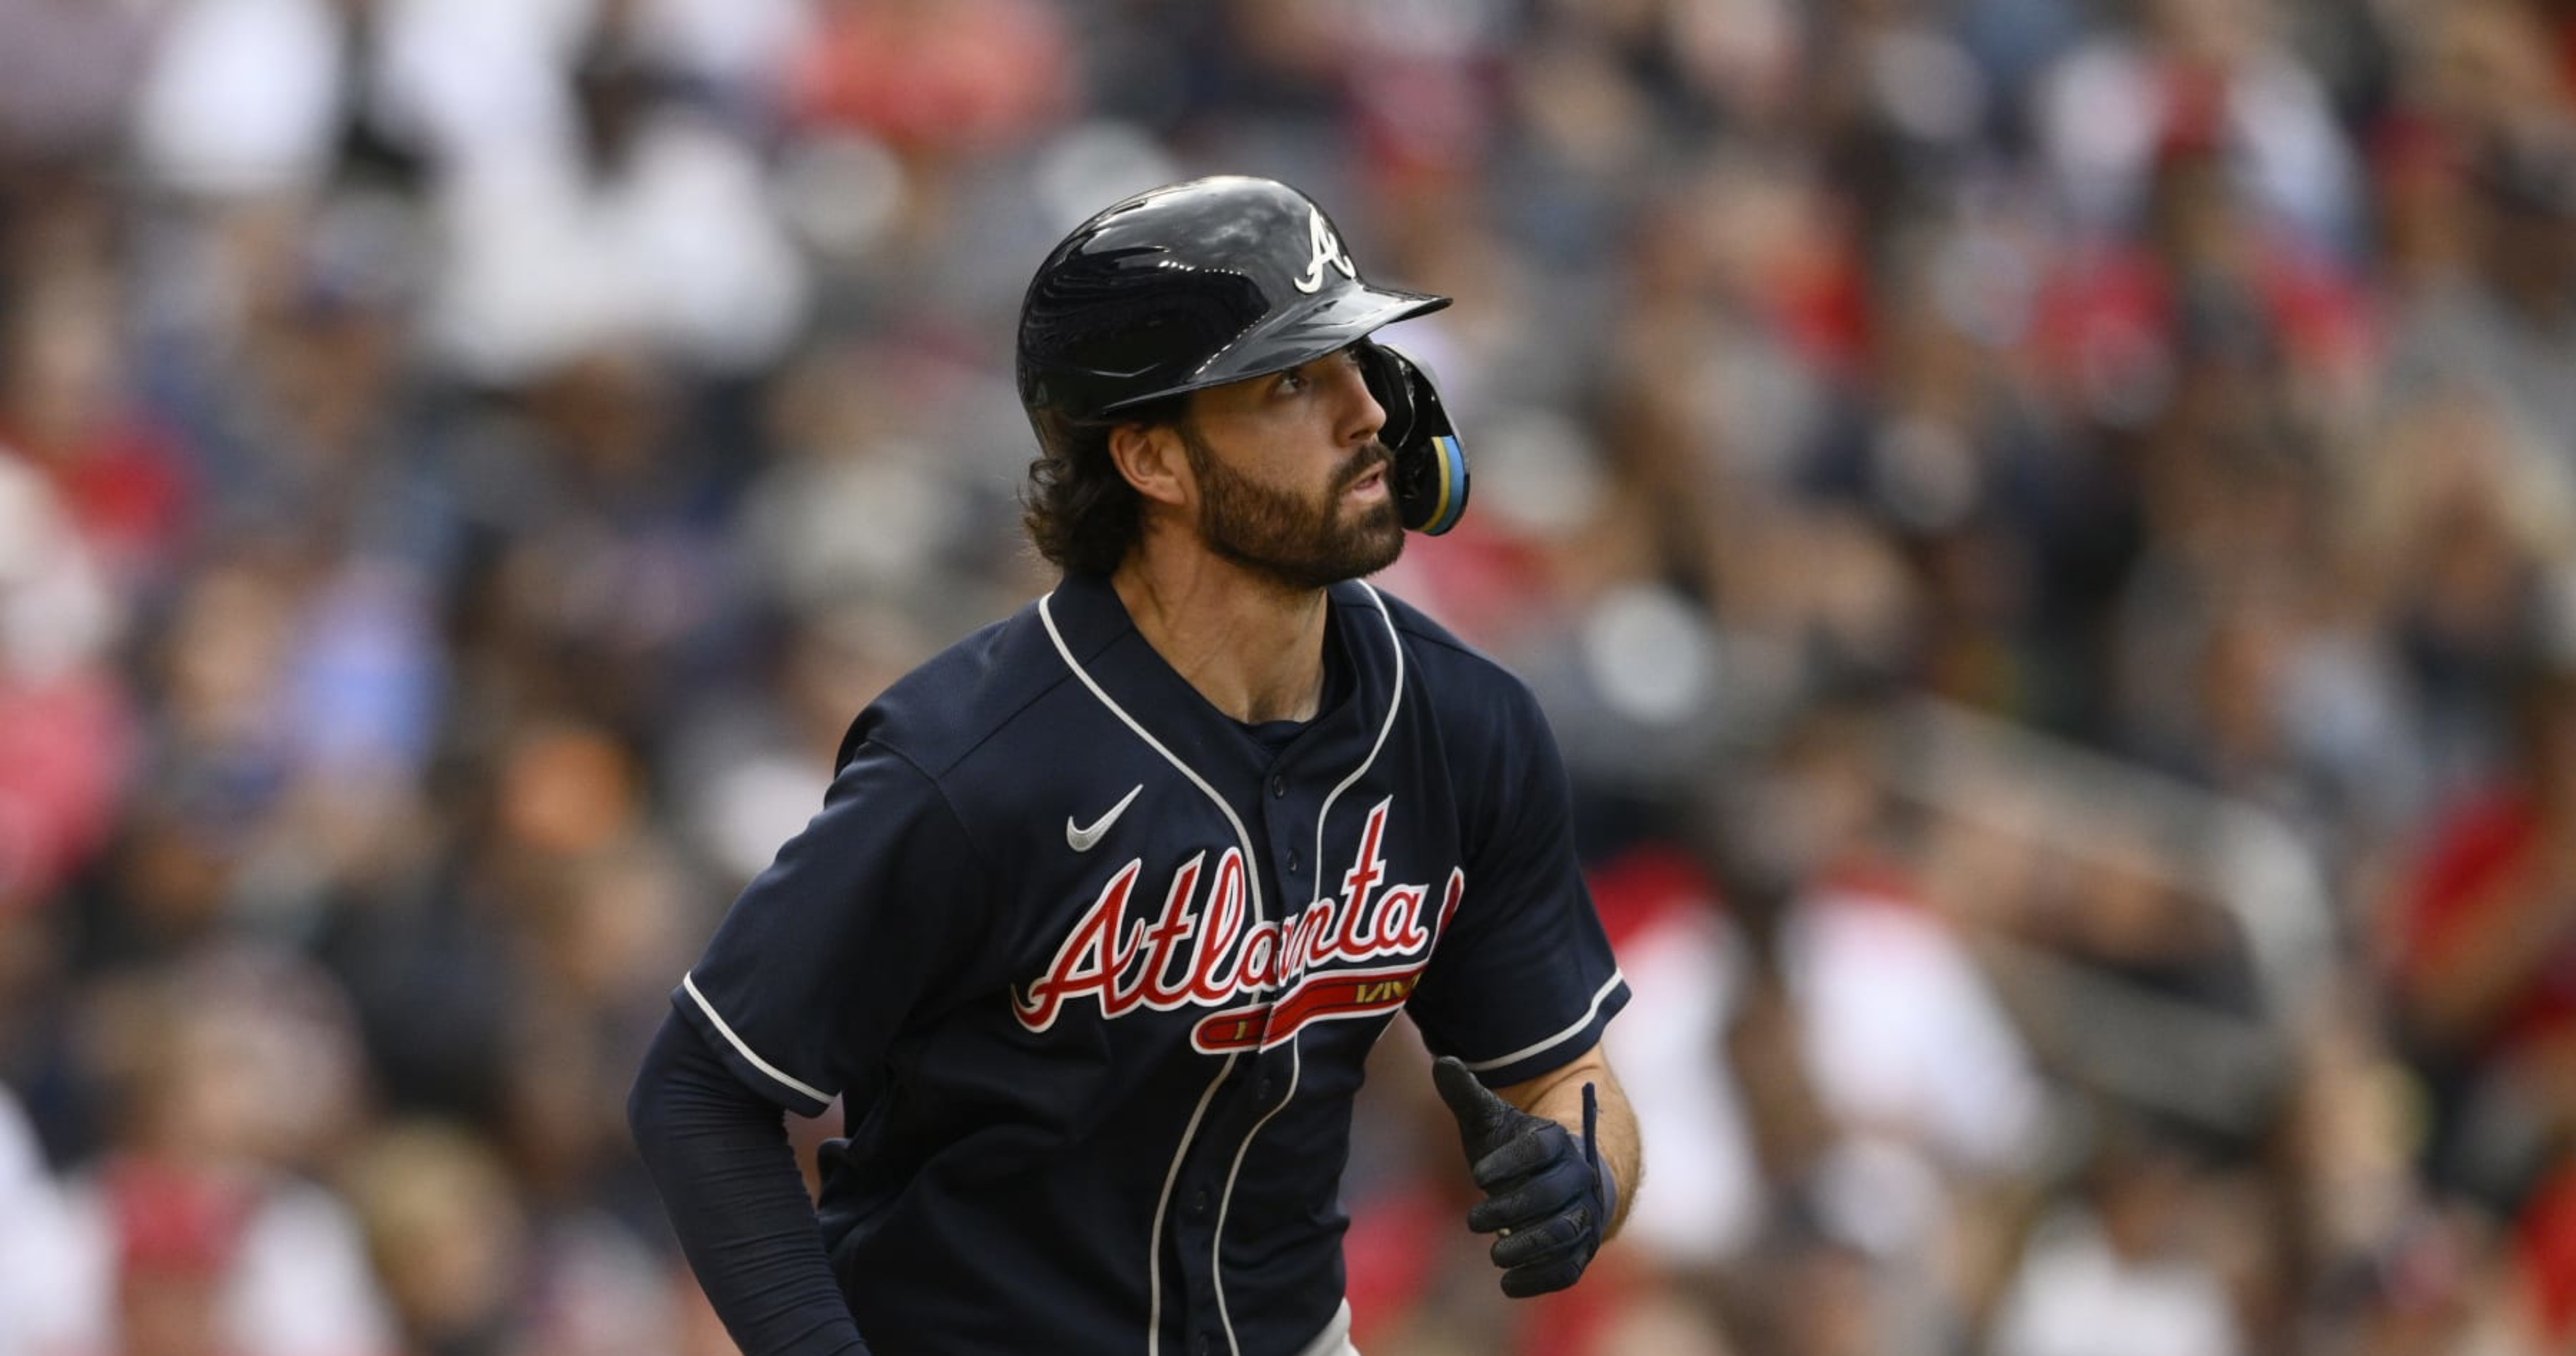 Braves' Dansby Swanson switching numbers from 2 back to 7